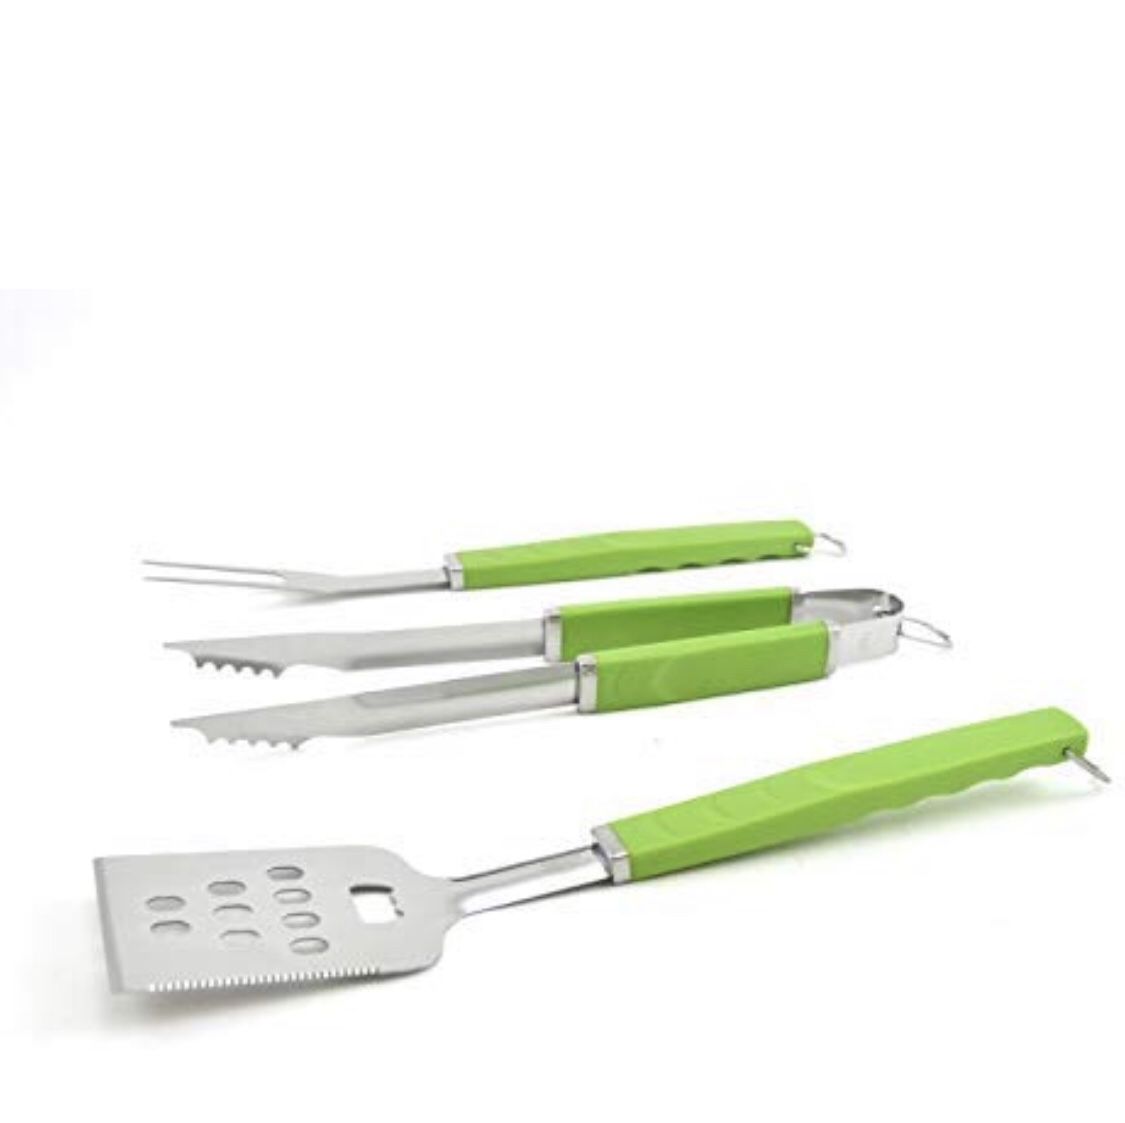 Vacia and dad Perfect Chef 3-Piece BBQ Grill Tool Set with Green Handle